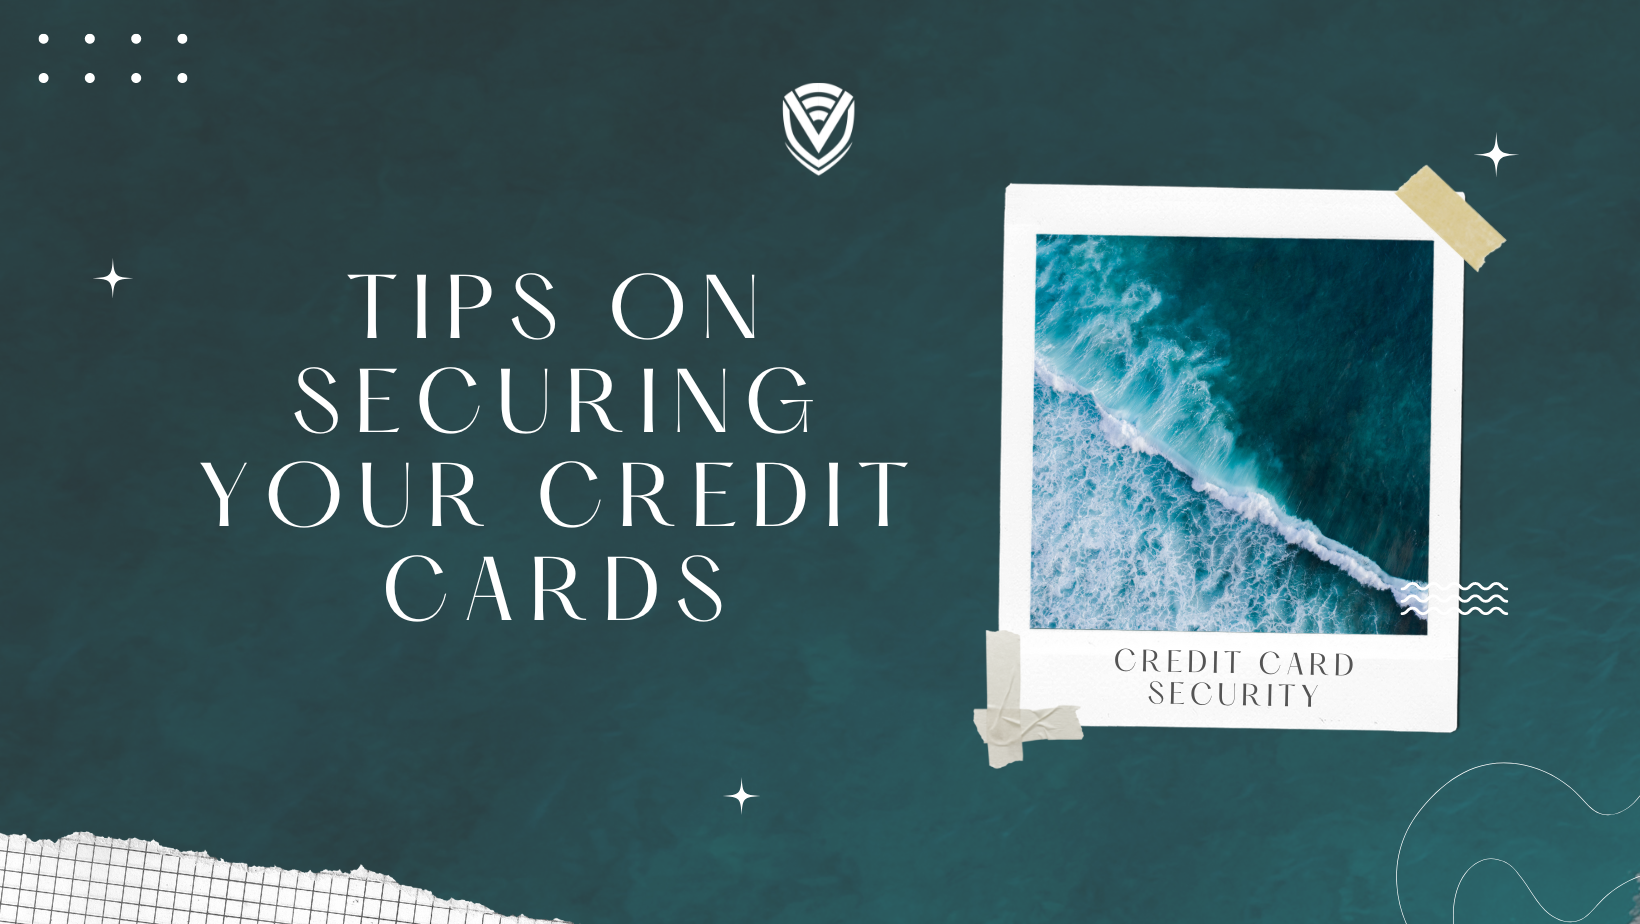 Tips on Securing Your Credit Cards